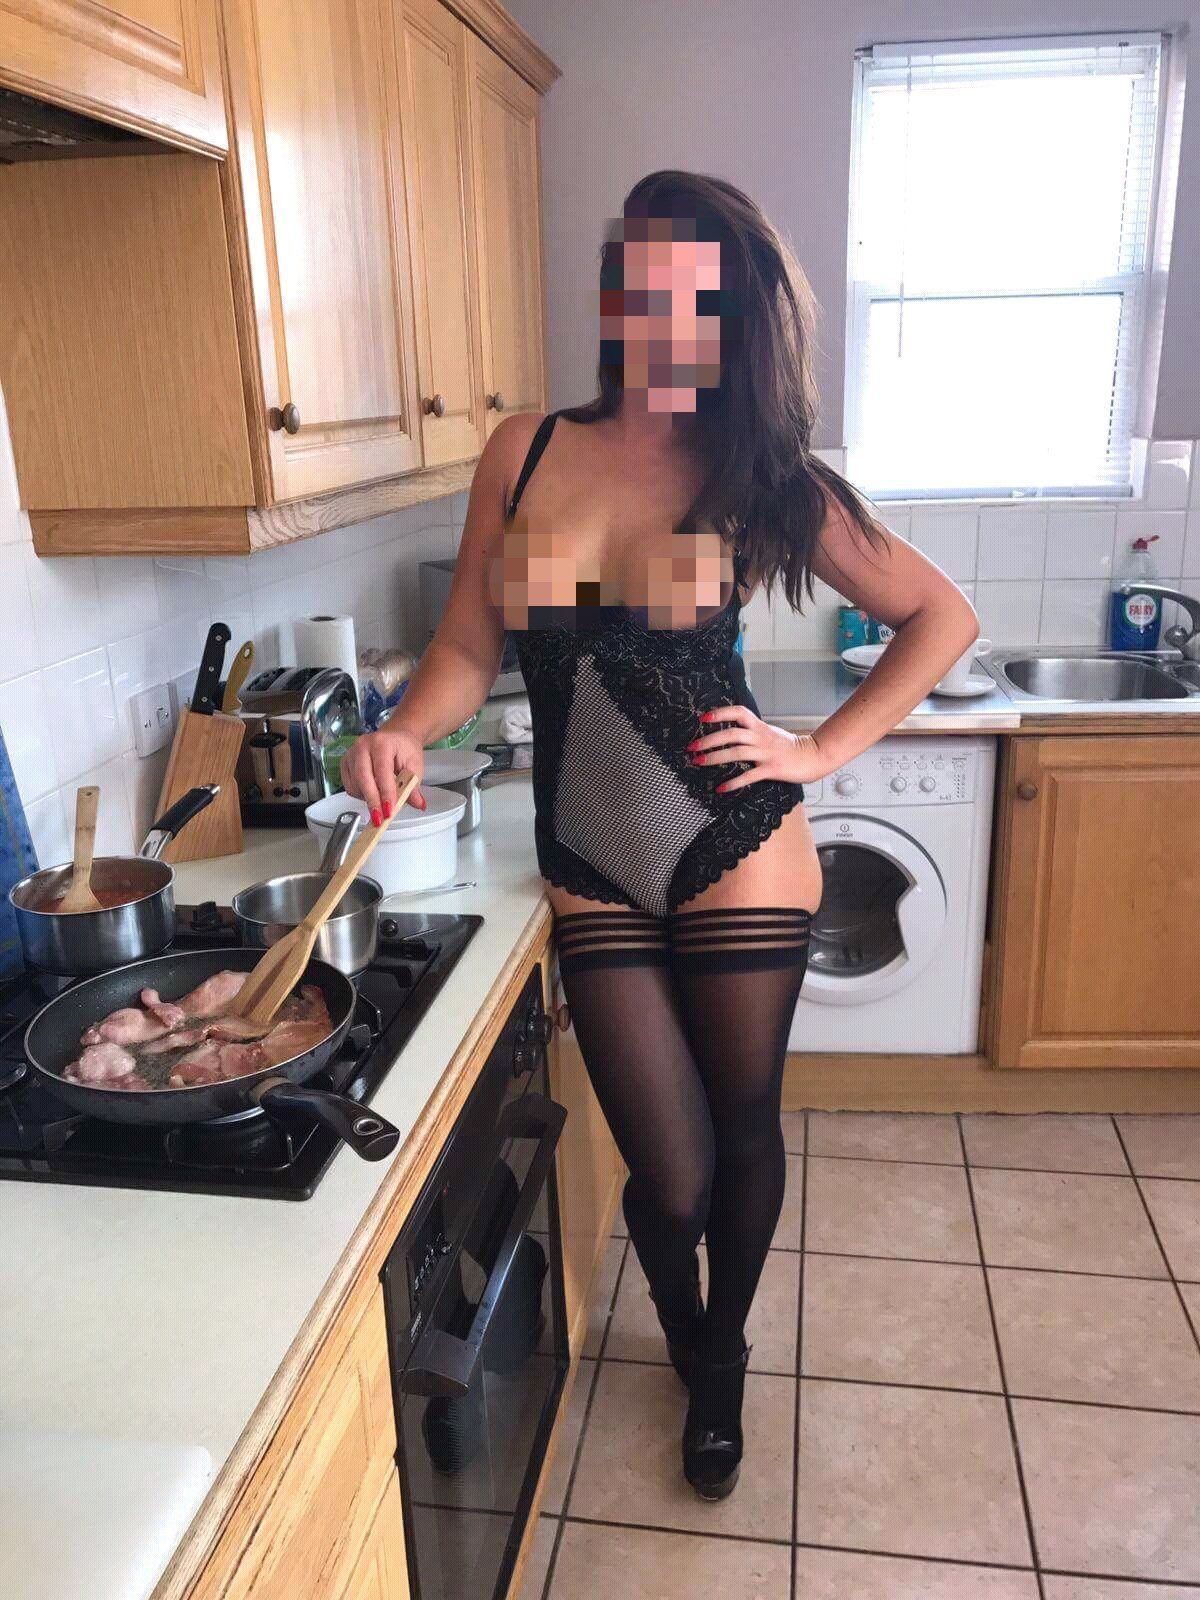 Gorgeous girls serving breakfast in bed at stag parties UK